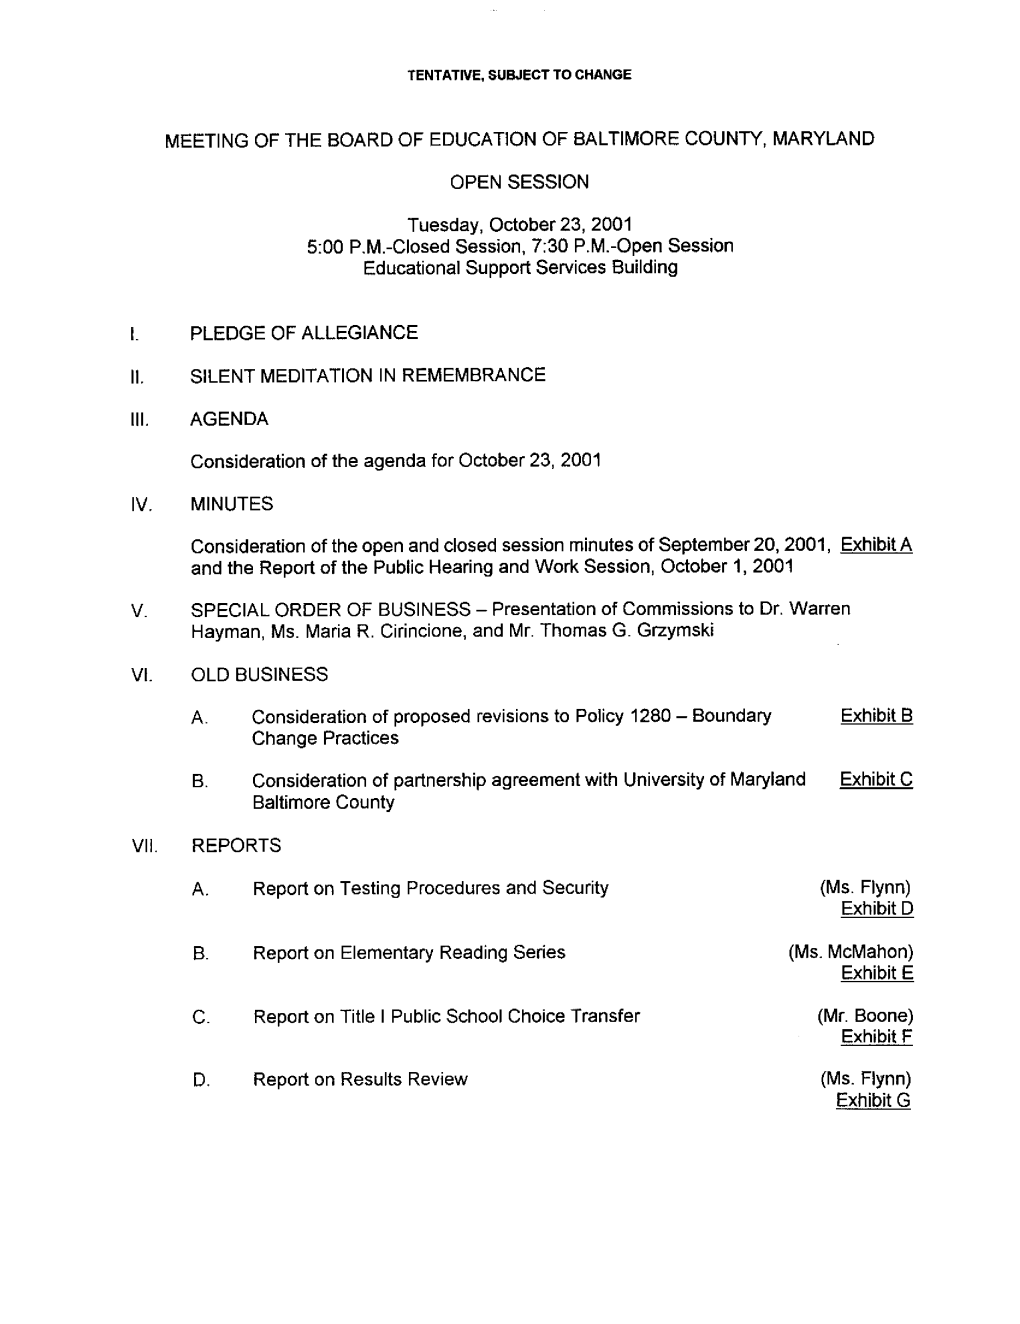 Board of Education Agenda and Exhibits for October 23, 2001